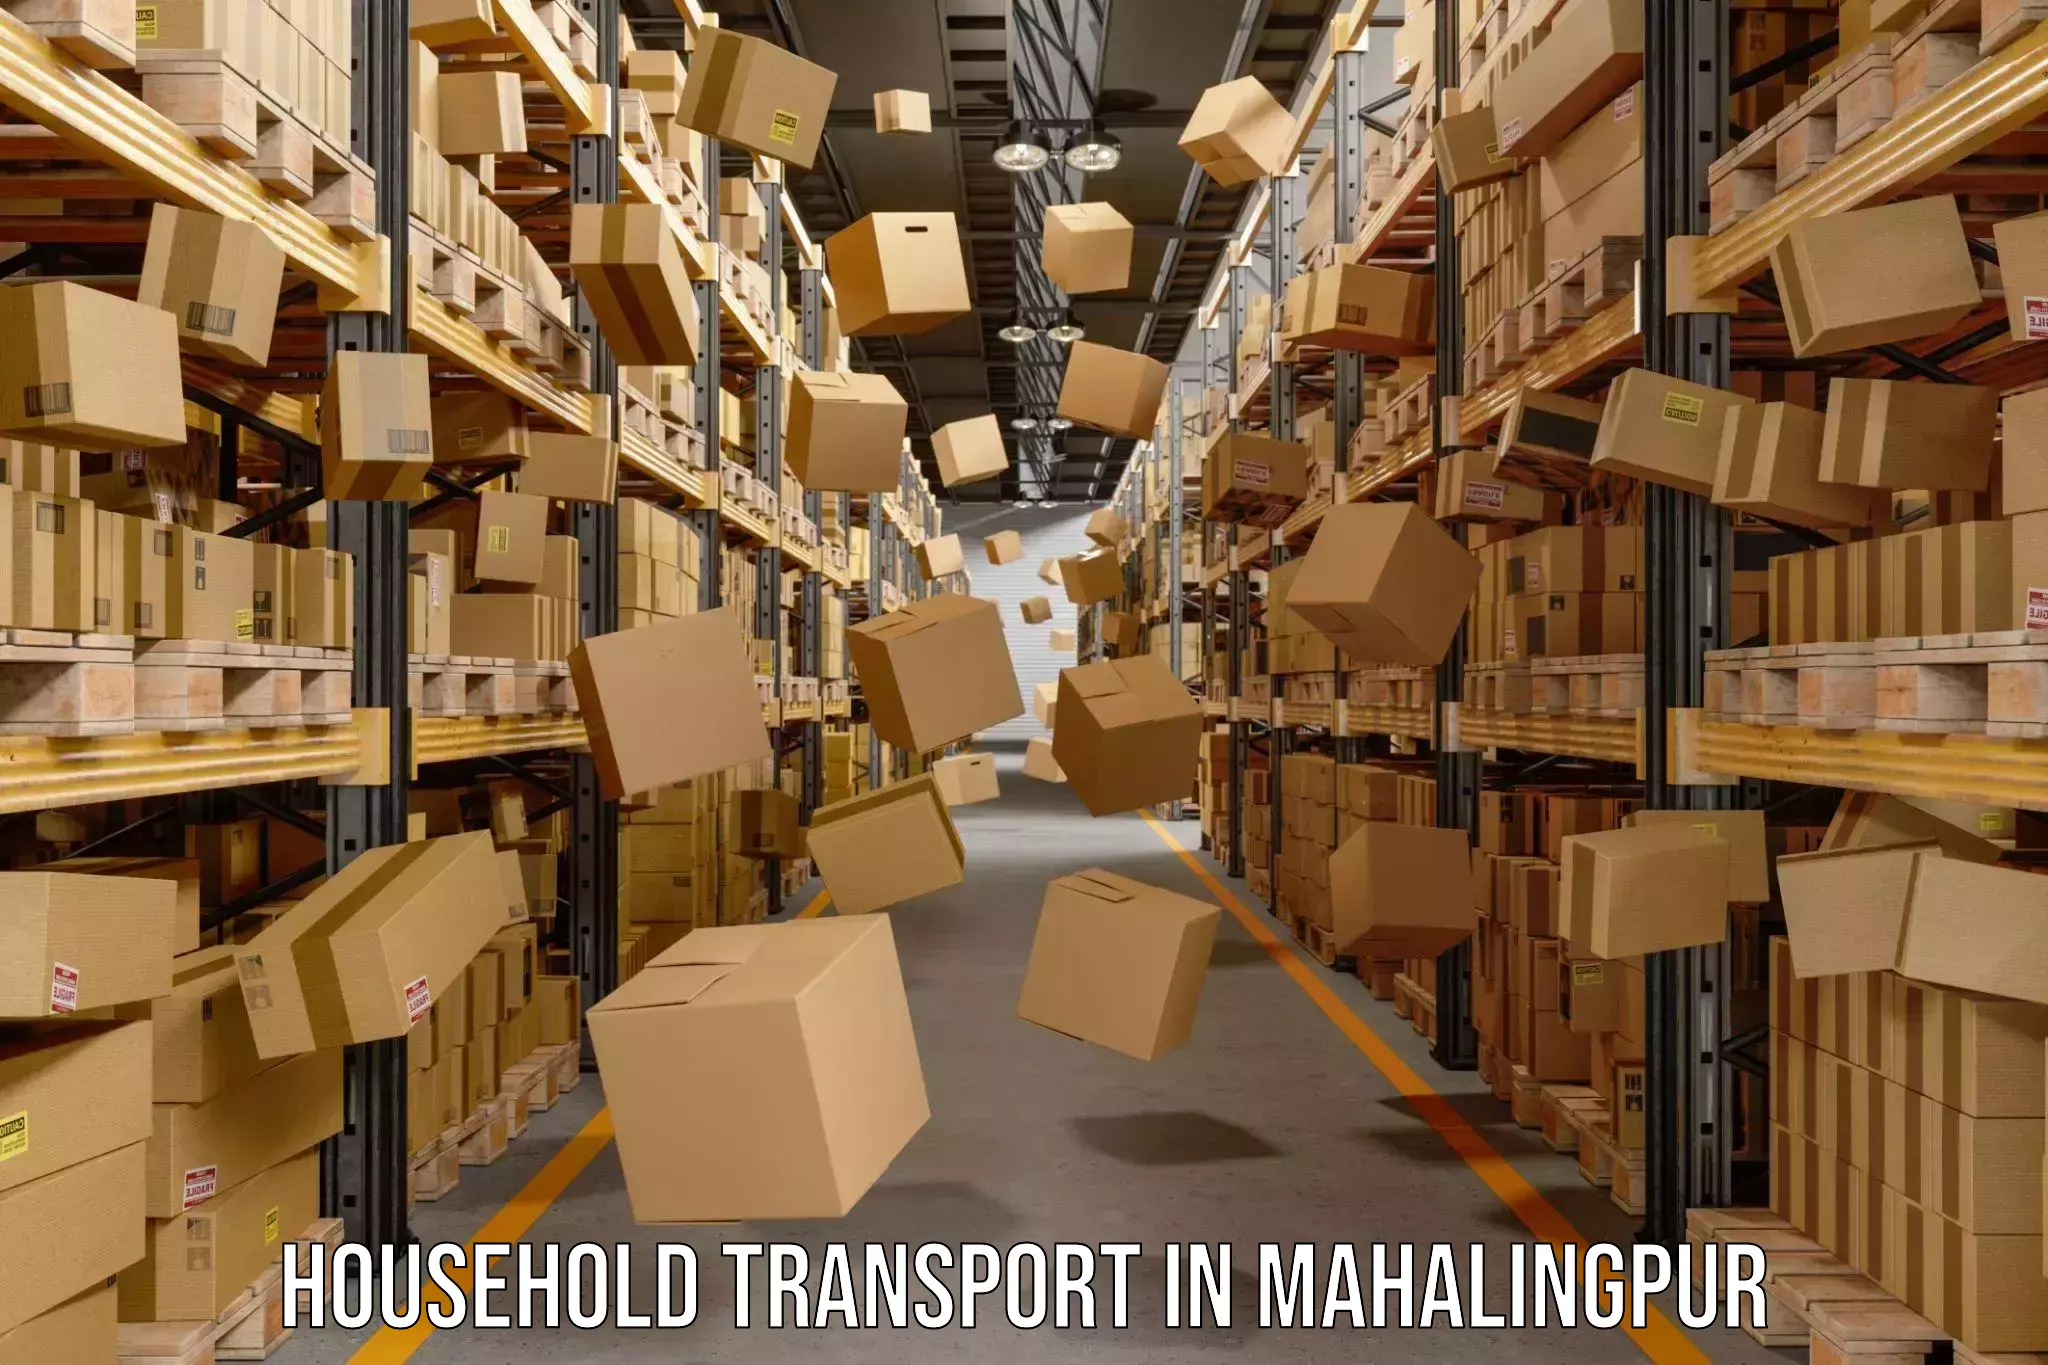 Household transport services in Mahalingpur